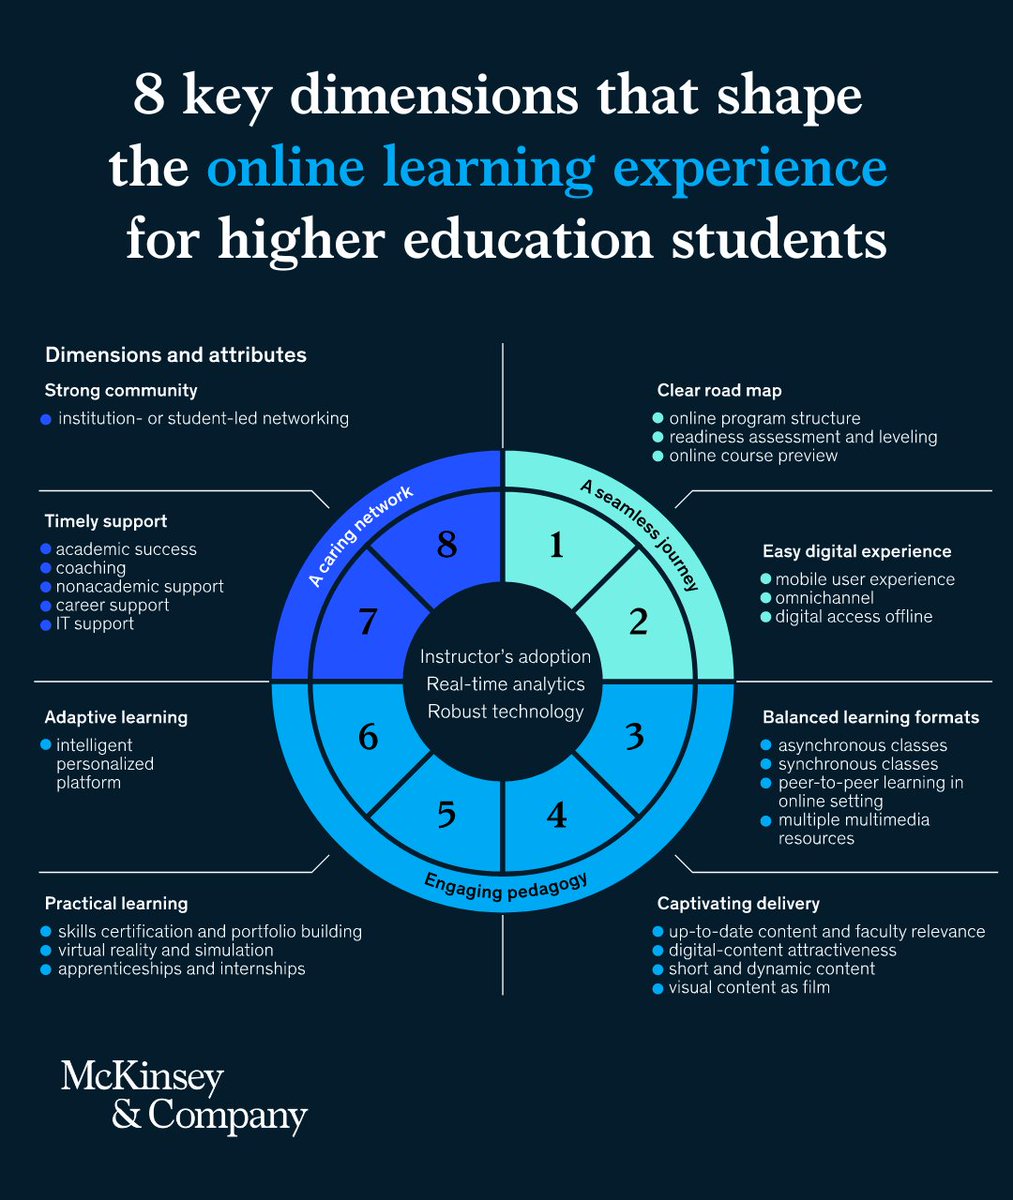 Here is a survey of 7,000+ students across 17 countries to uncover top priorities in online higher education- #infographic!

What do students really want?

via @McKinsey 

#HigherEd #OnlineLearning #EducationInsights  #DigitalEducation #EducationResearch #GlobalStudy